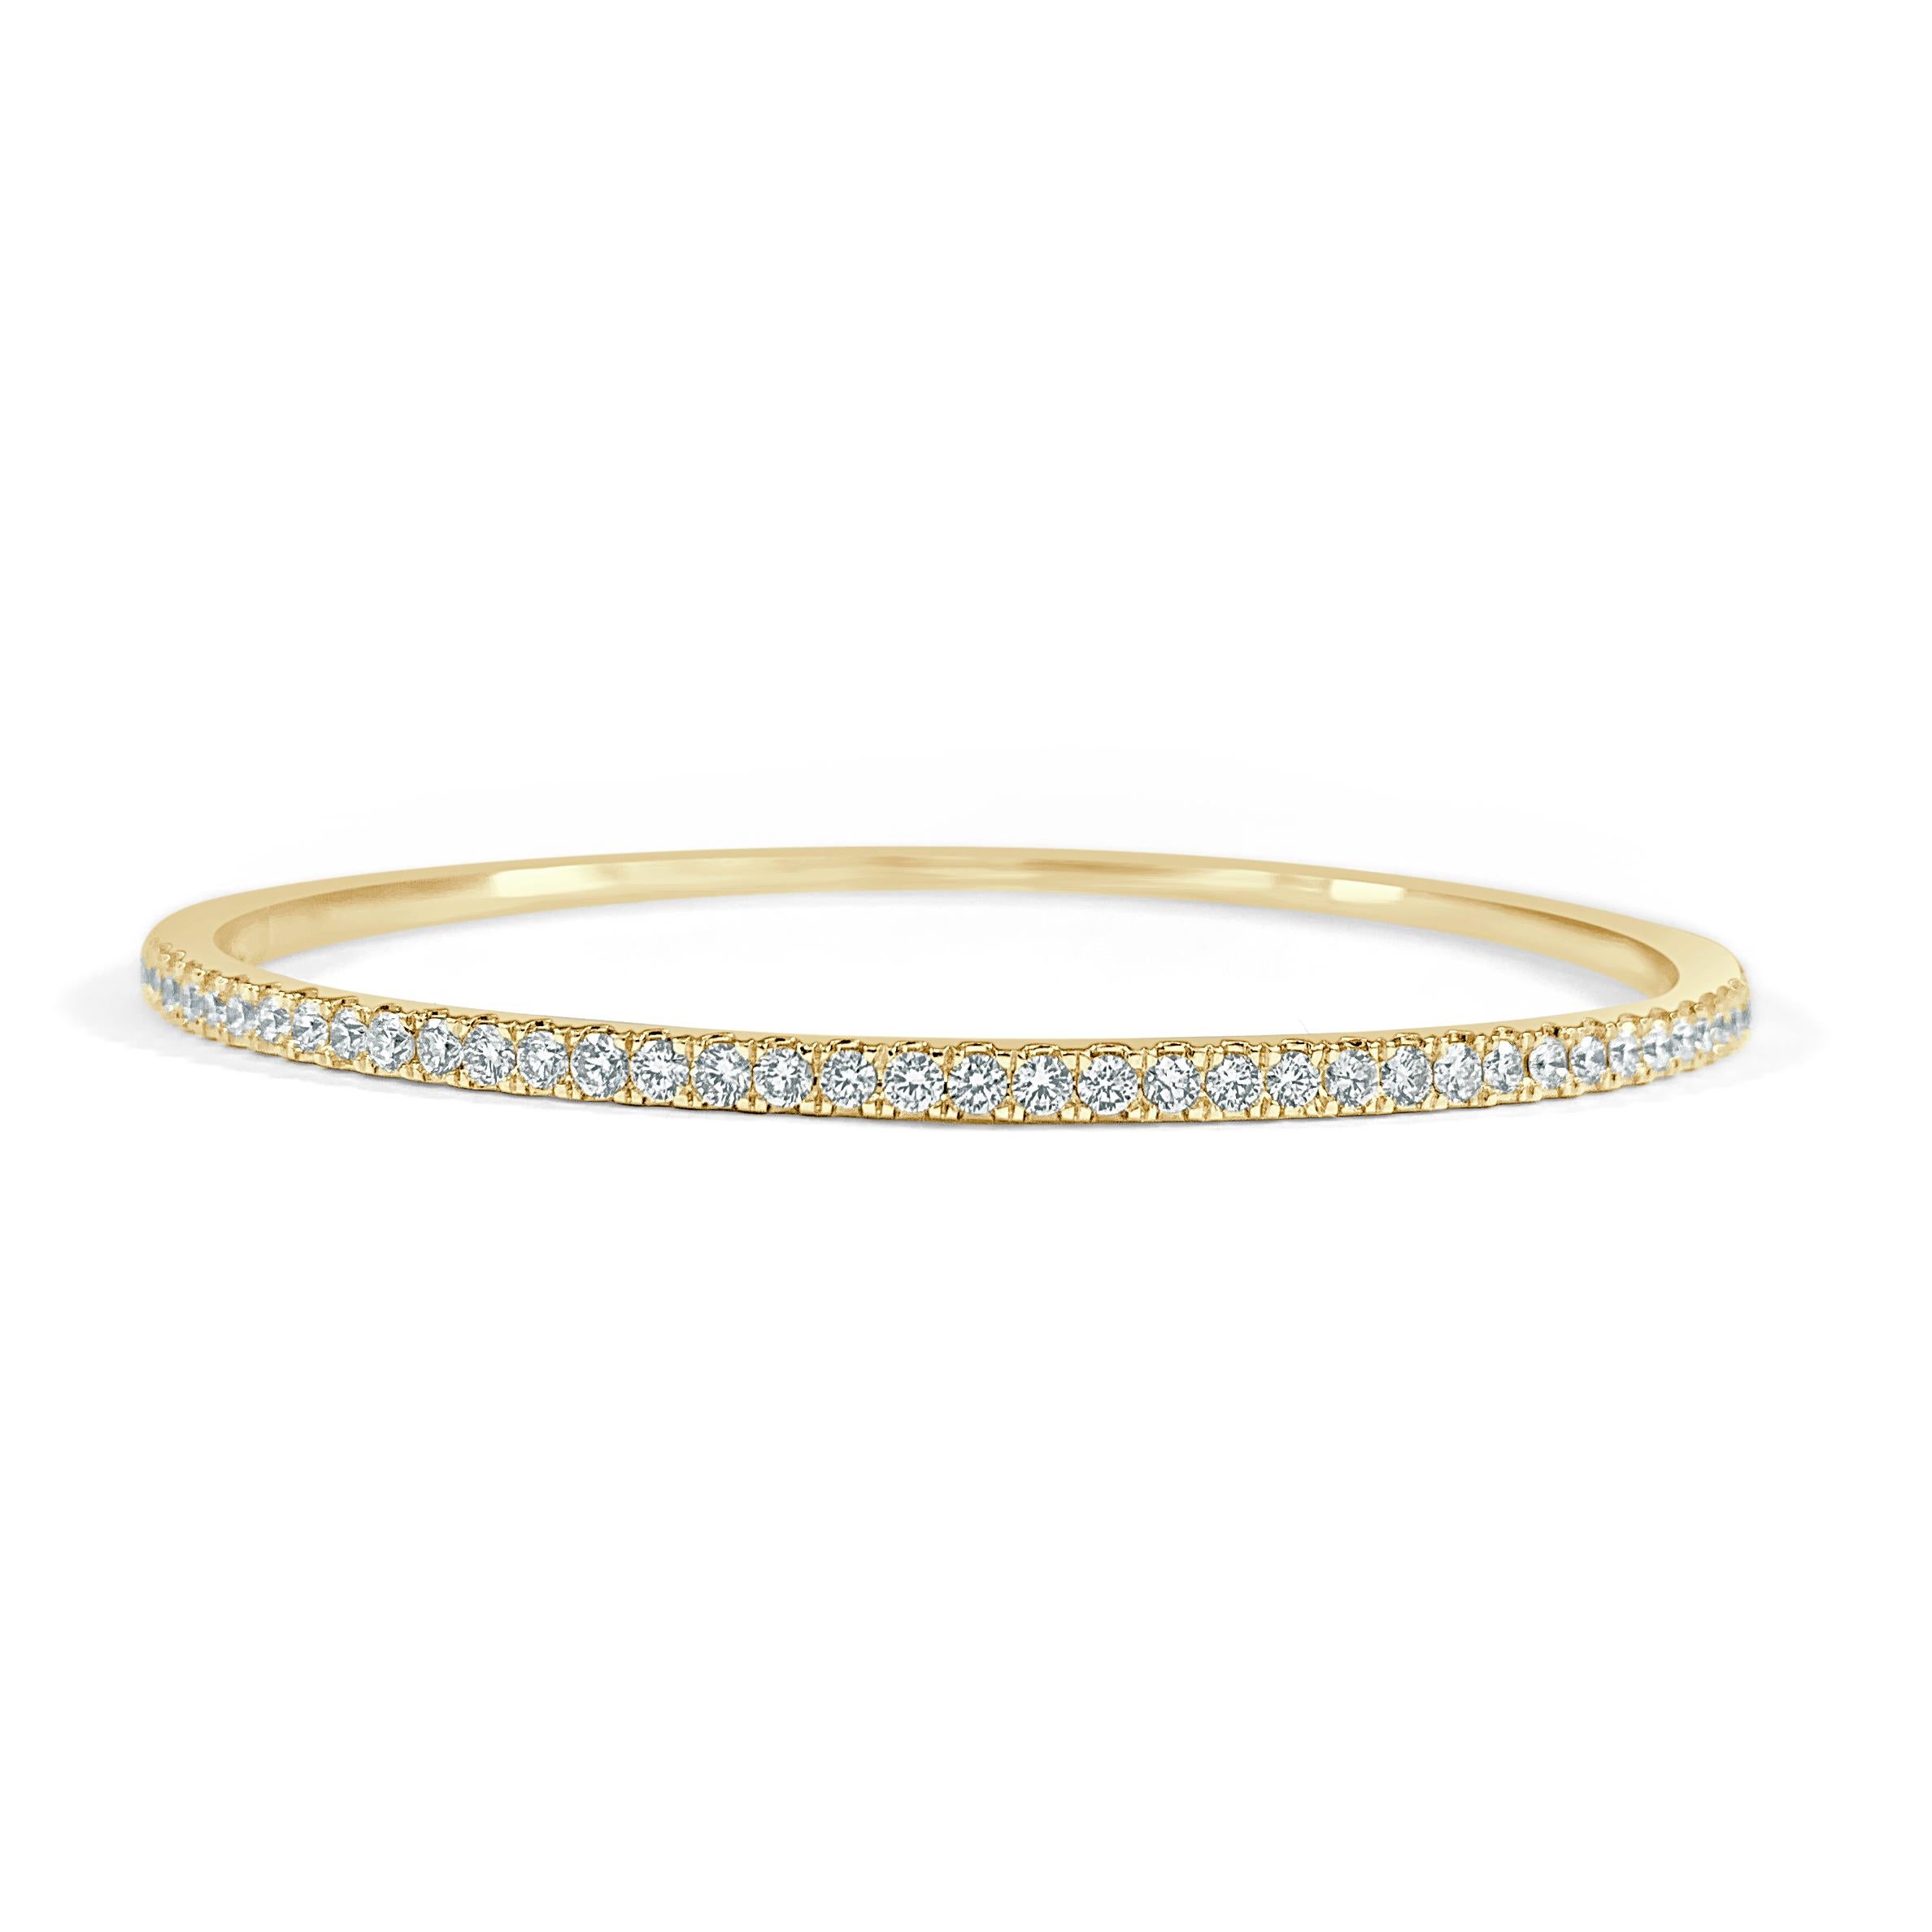 how much is a 14k gold bangle bracelet worth